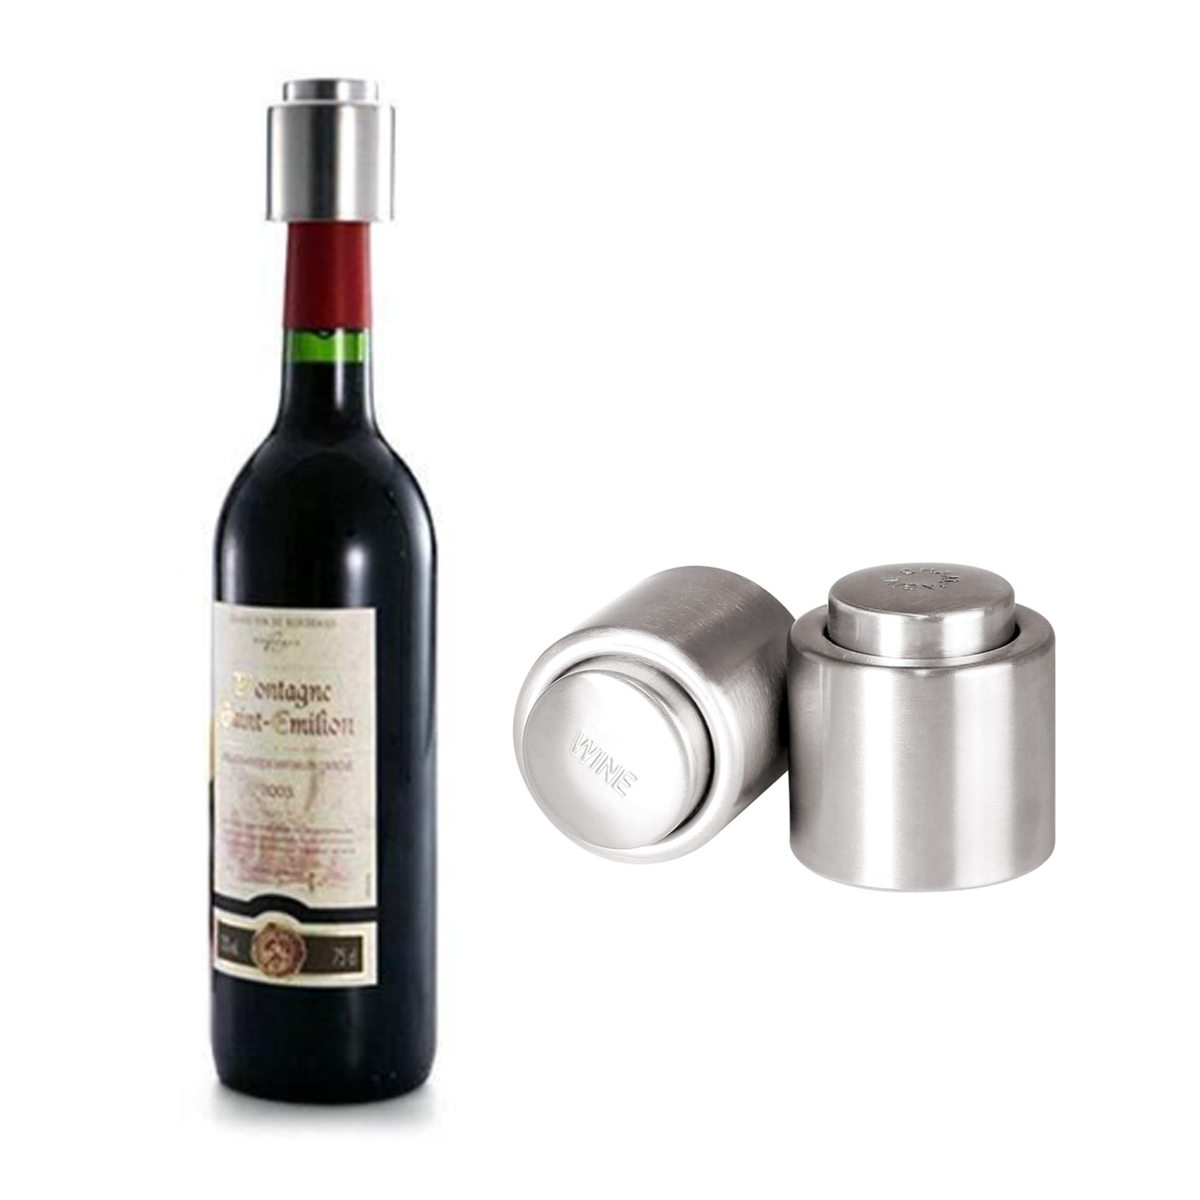 Stainless Steel Push Wine Stopper